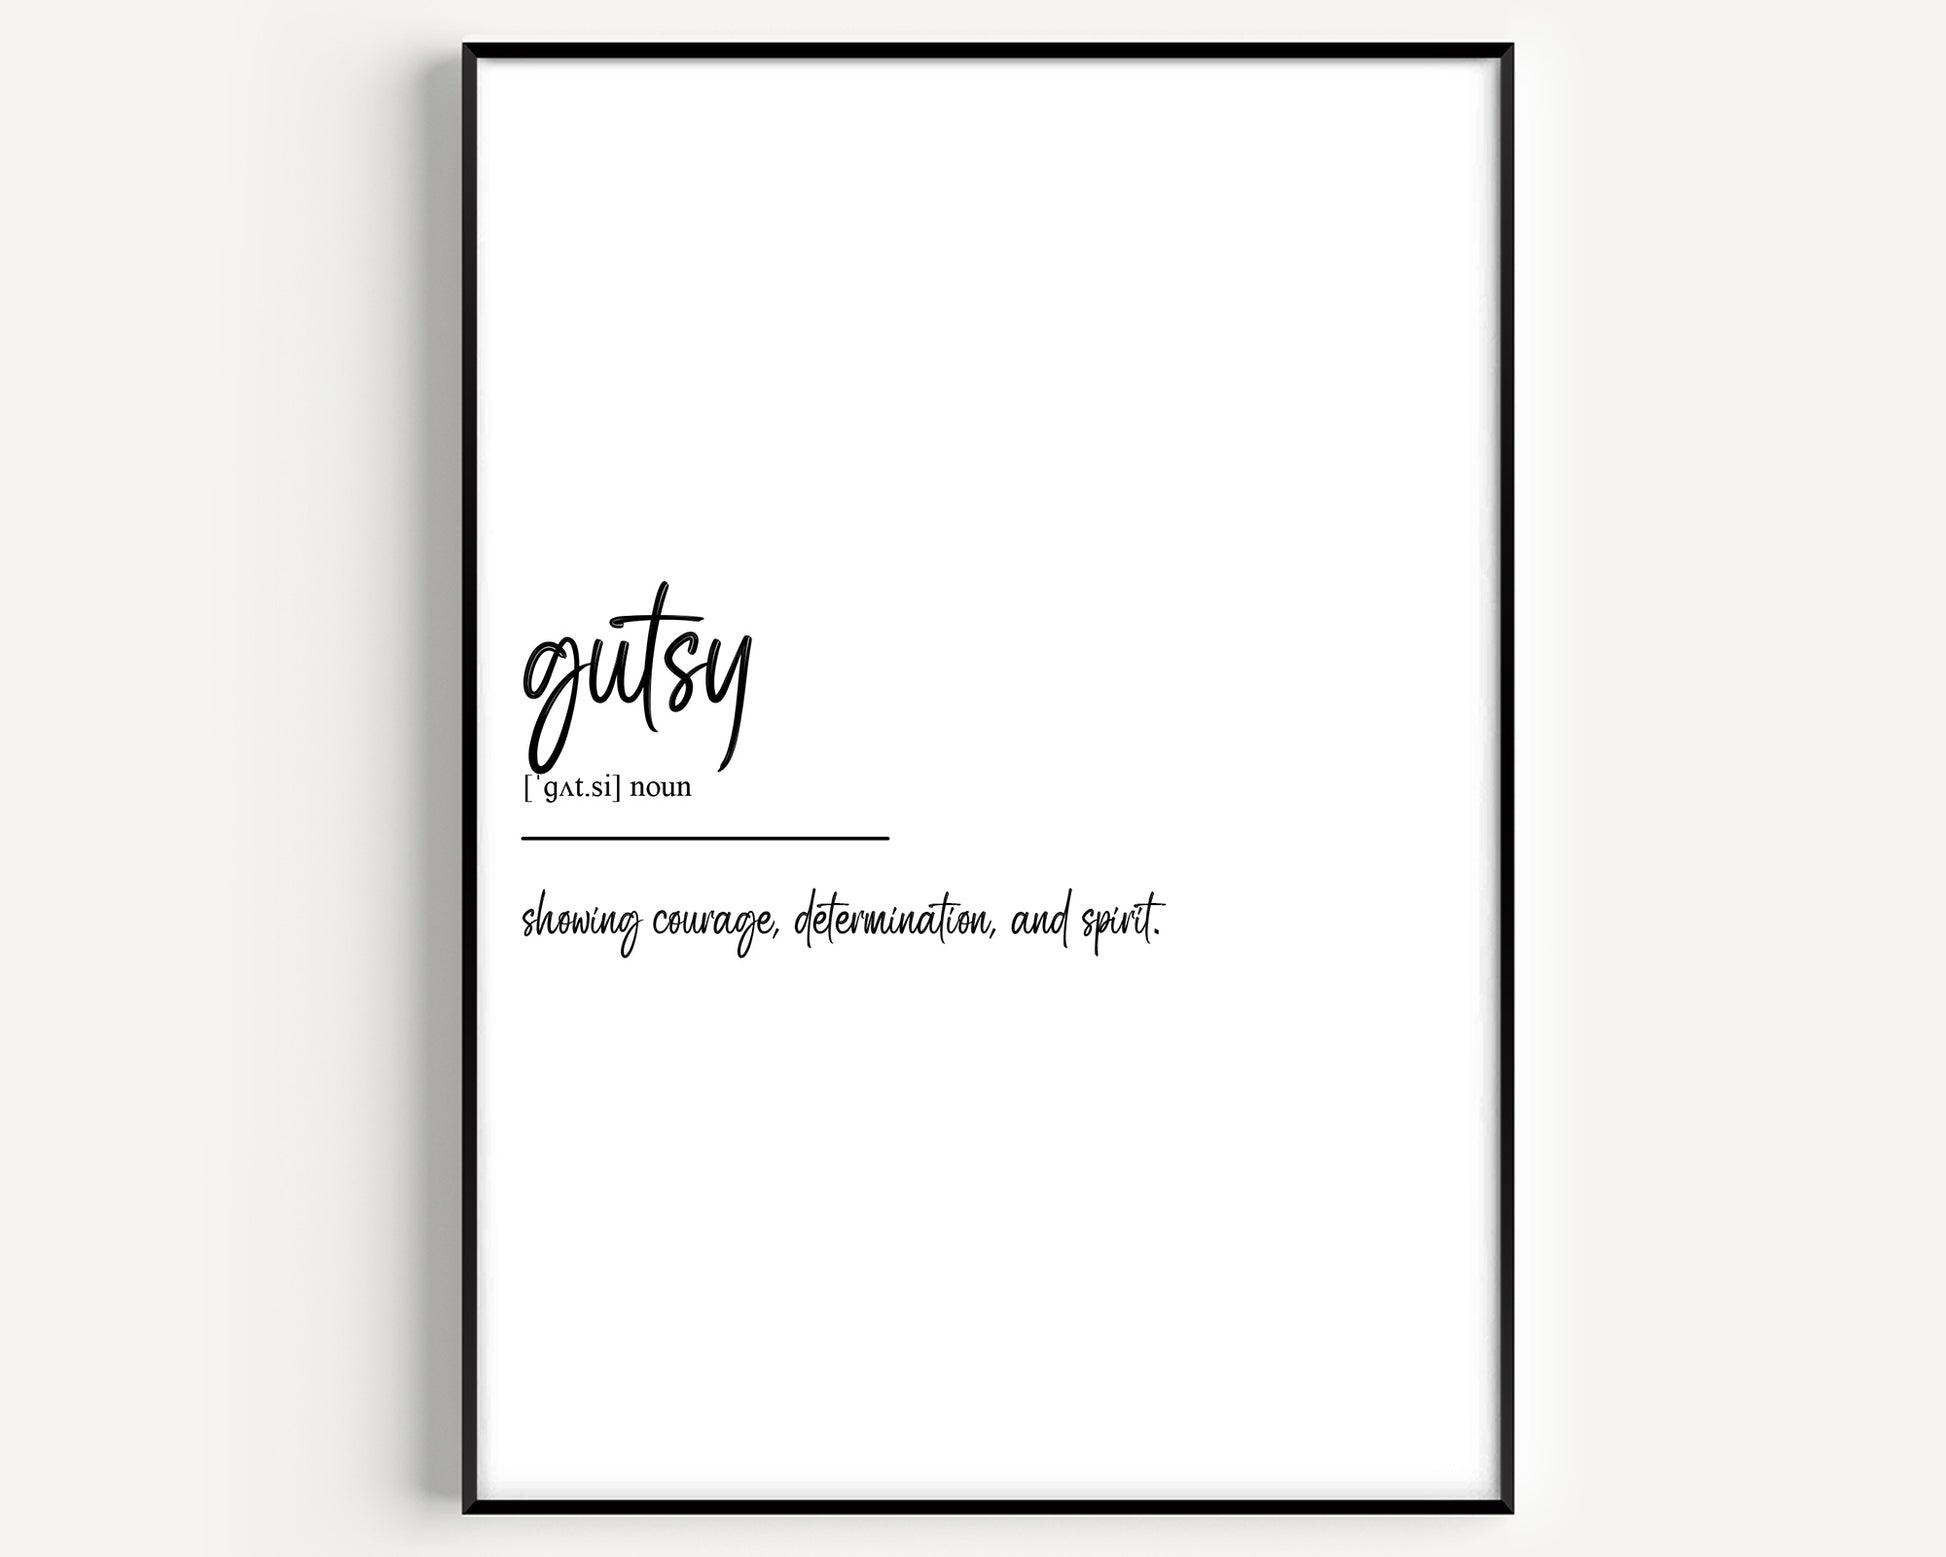 Gutsy Definition Print - Magic Posters